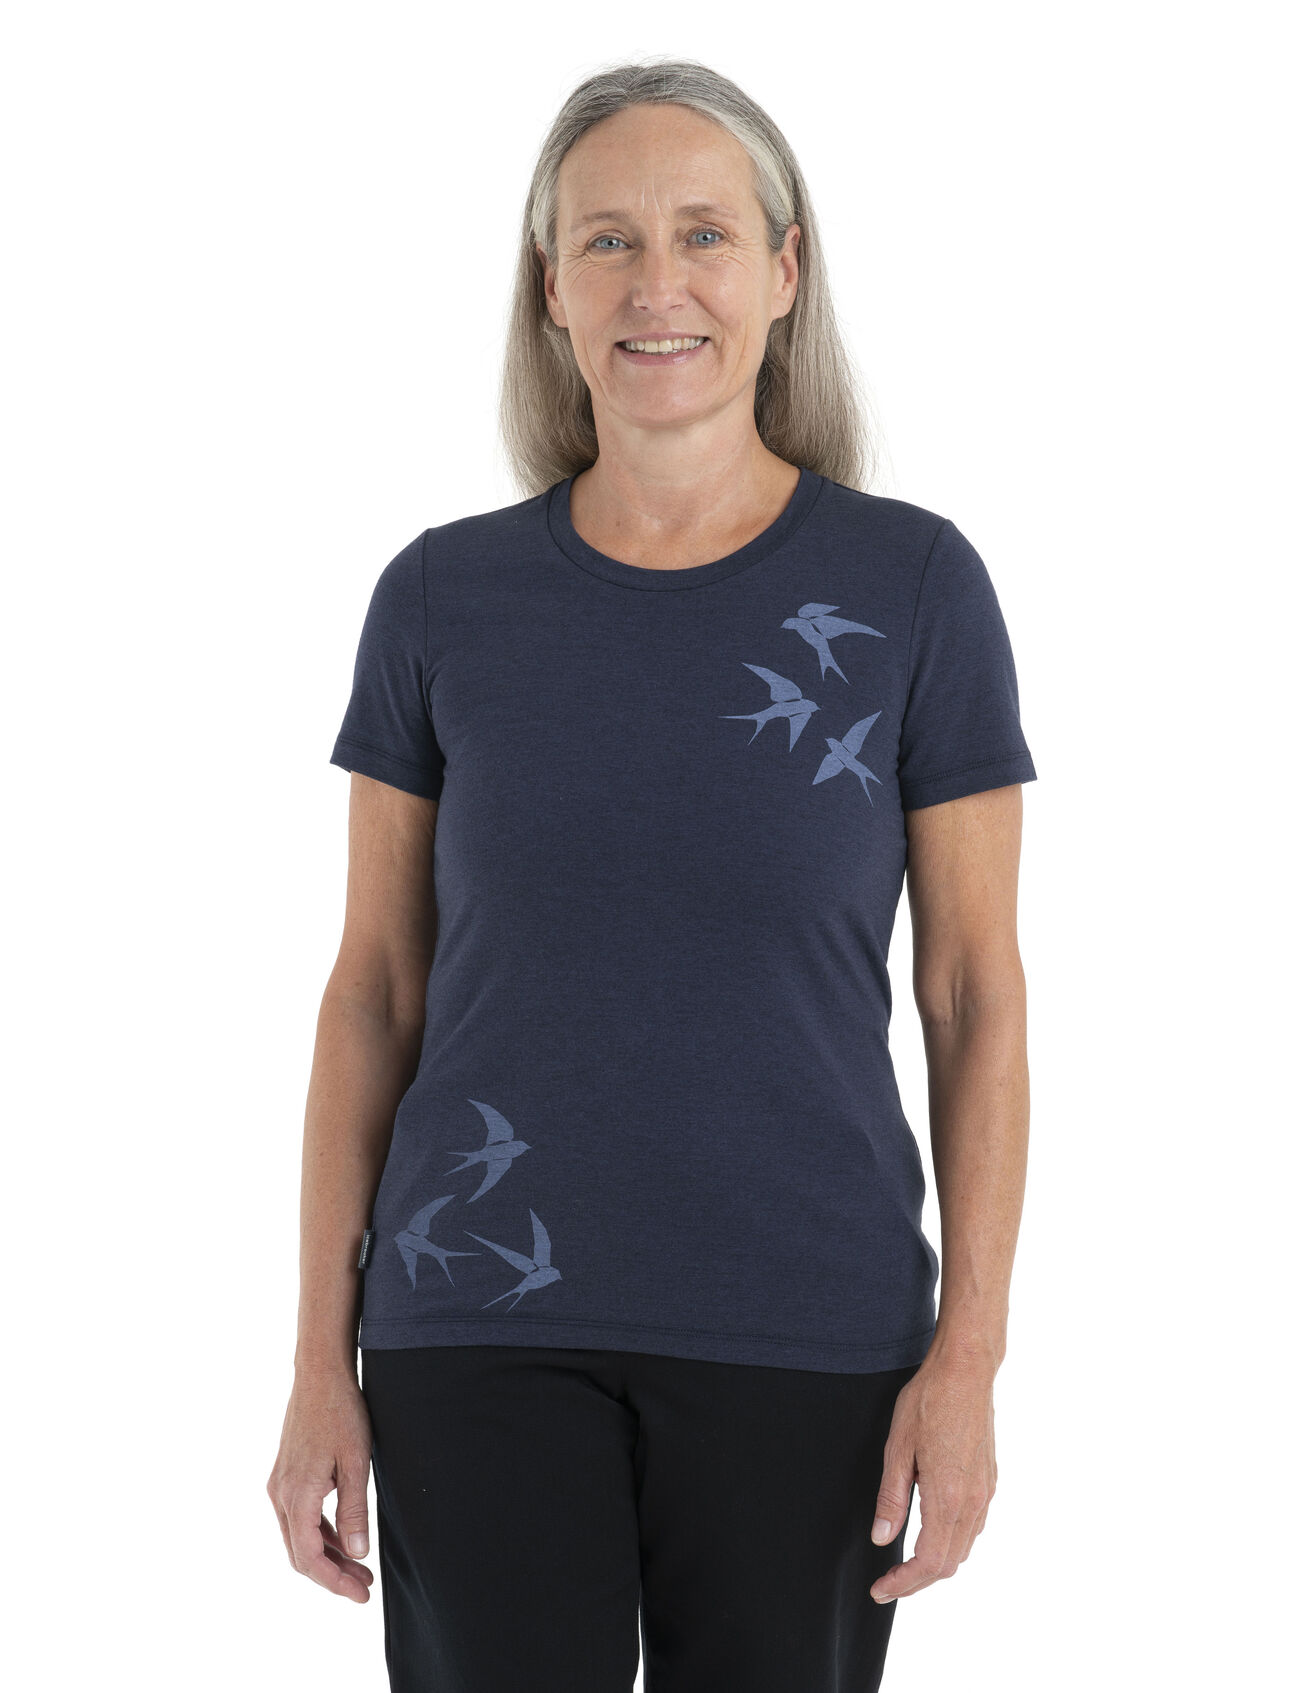 Womens Merino Central Classic Short Sleeve T-Shirt Swarming Shapes Central to your wardrobe and as classic as they come, the Central Classic Short Sleeve Tee Swarming Shapes is a go-to tee featuring a soft jersey blend of merino wool and organic cotton. The original artwork draws inspiration from the darting and swooping of a flock of birds.